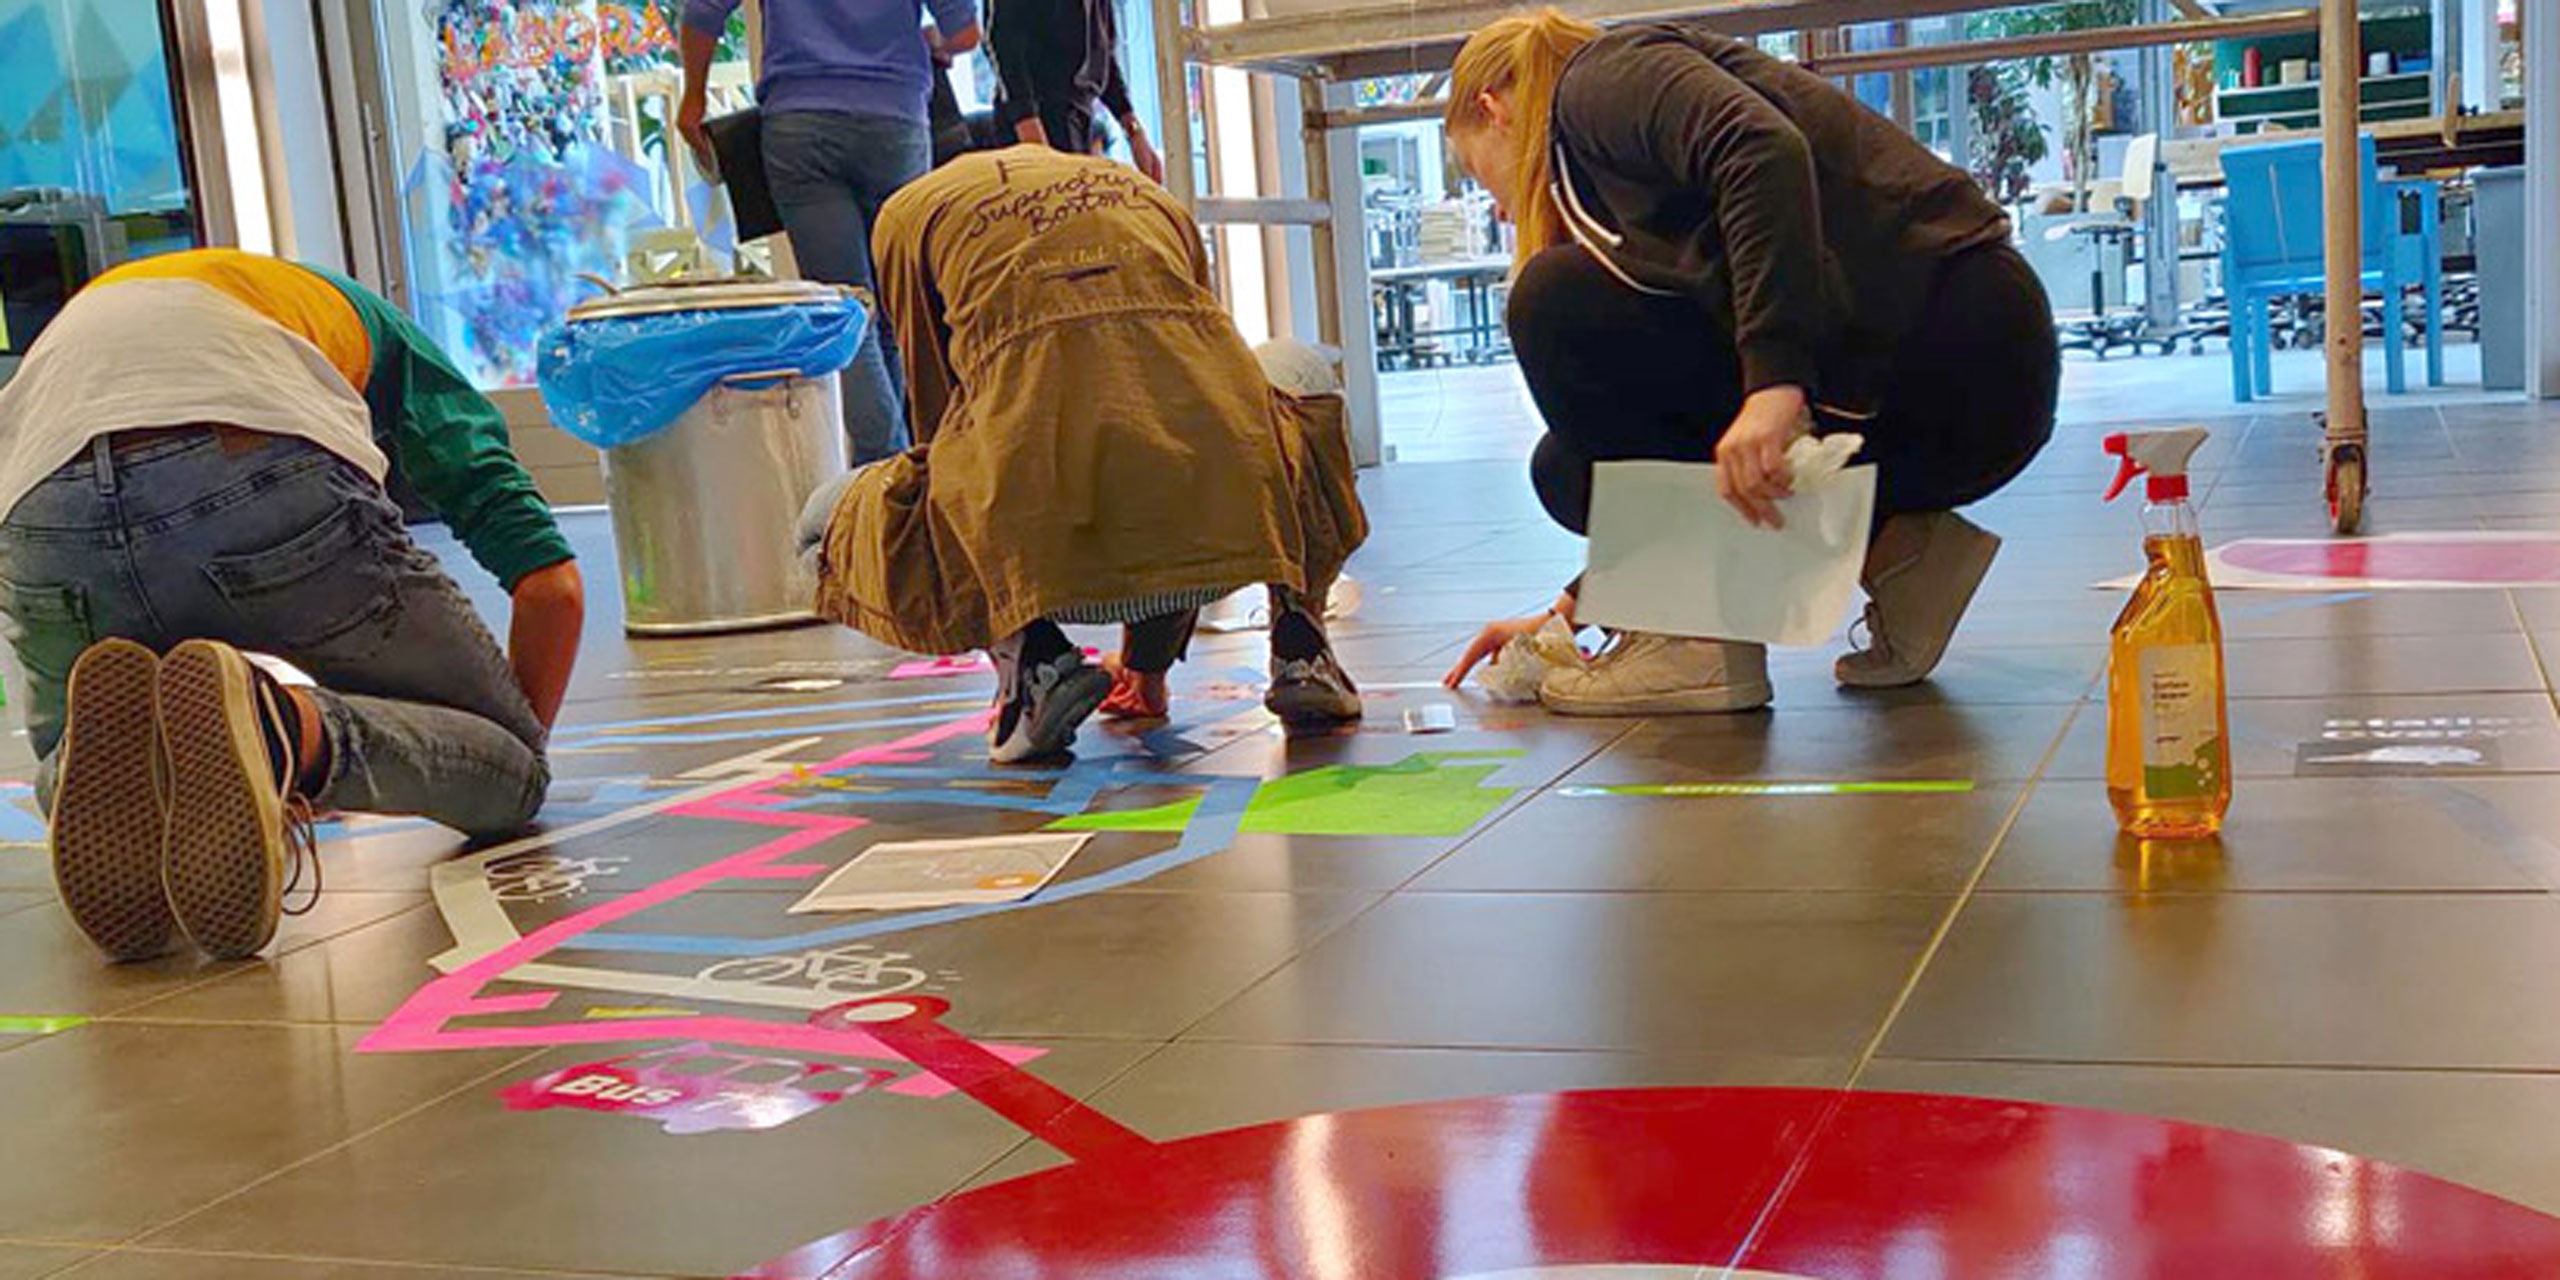 Young people adding colourful stickers to a tiled floor, showing different routes and pictograms